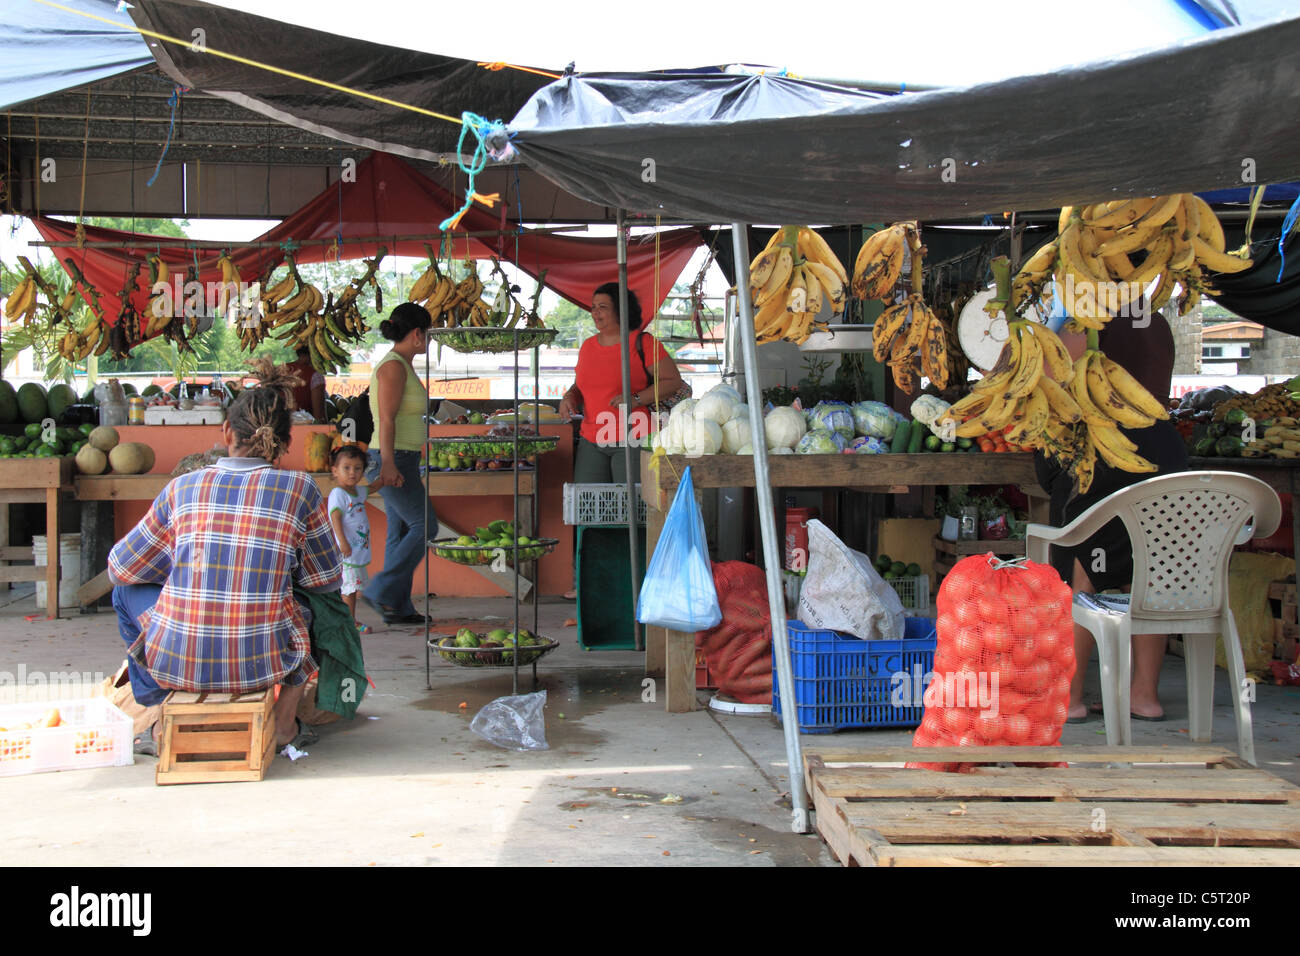 Stalls in the fruit and vegetable market, San Ignacio town centre, Cayo, west Belize, Central America Stock Photo